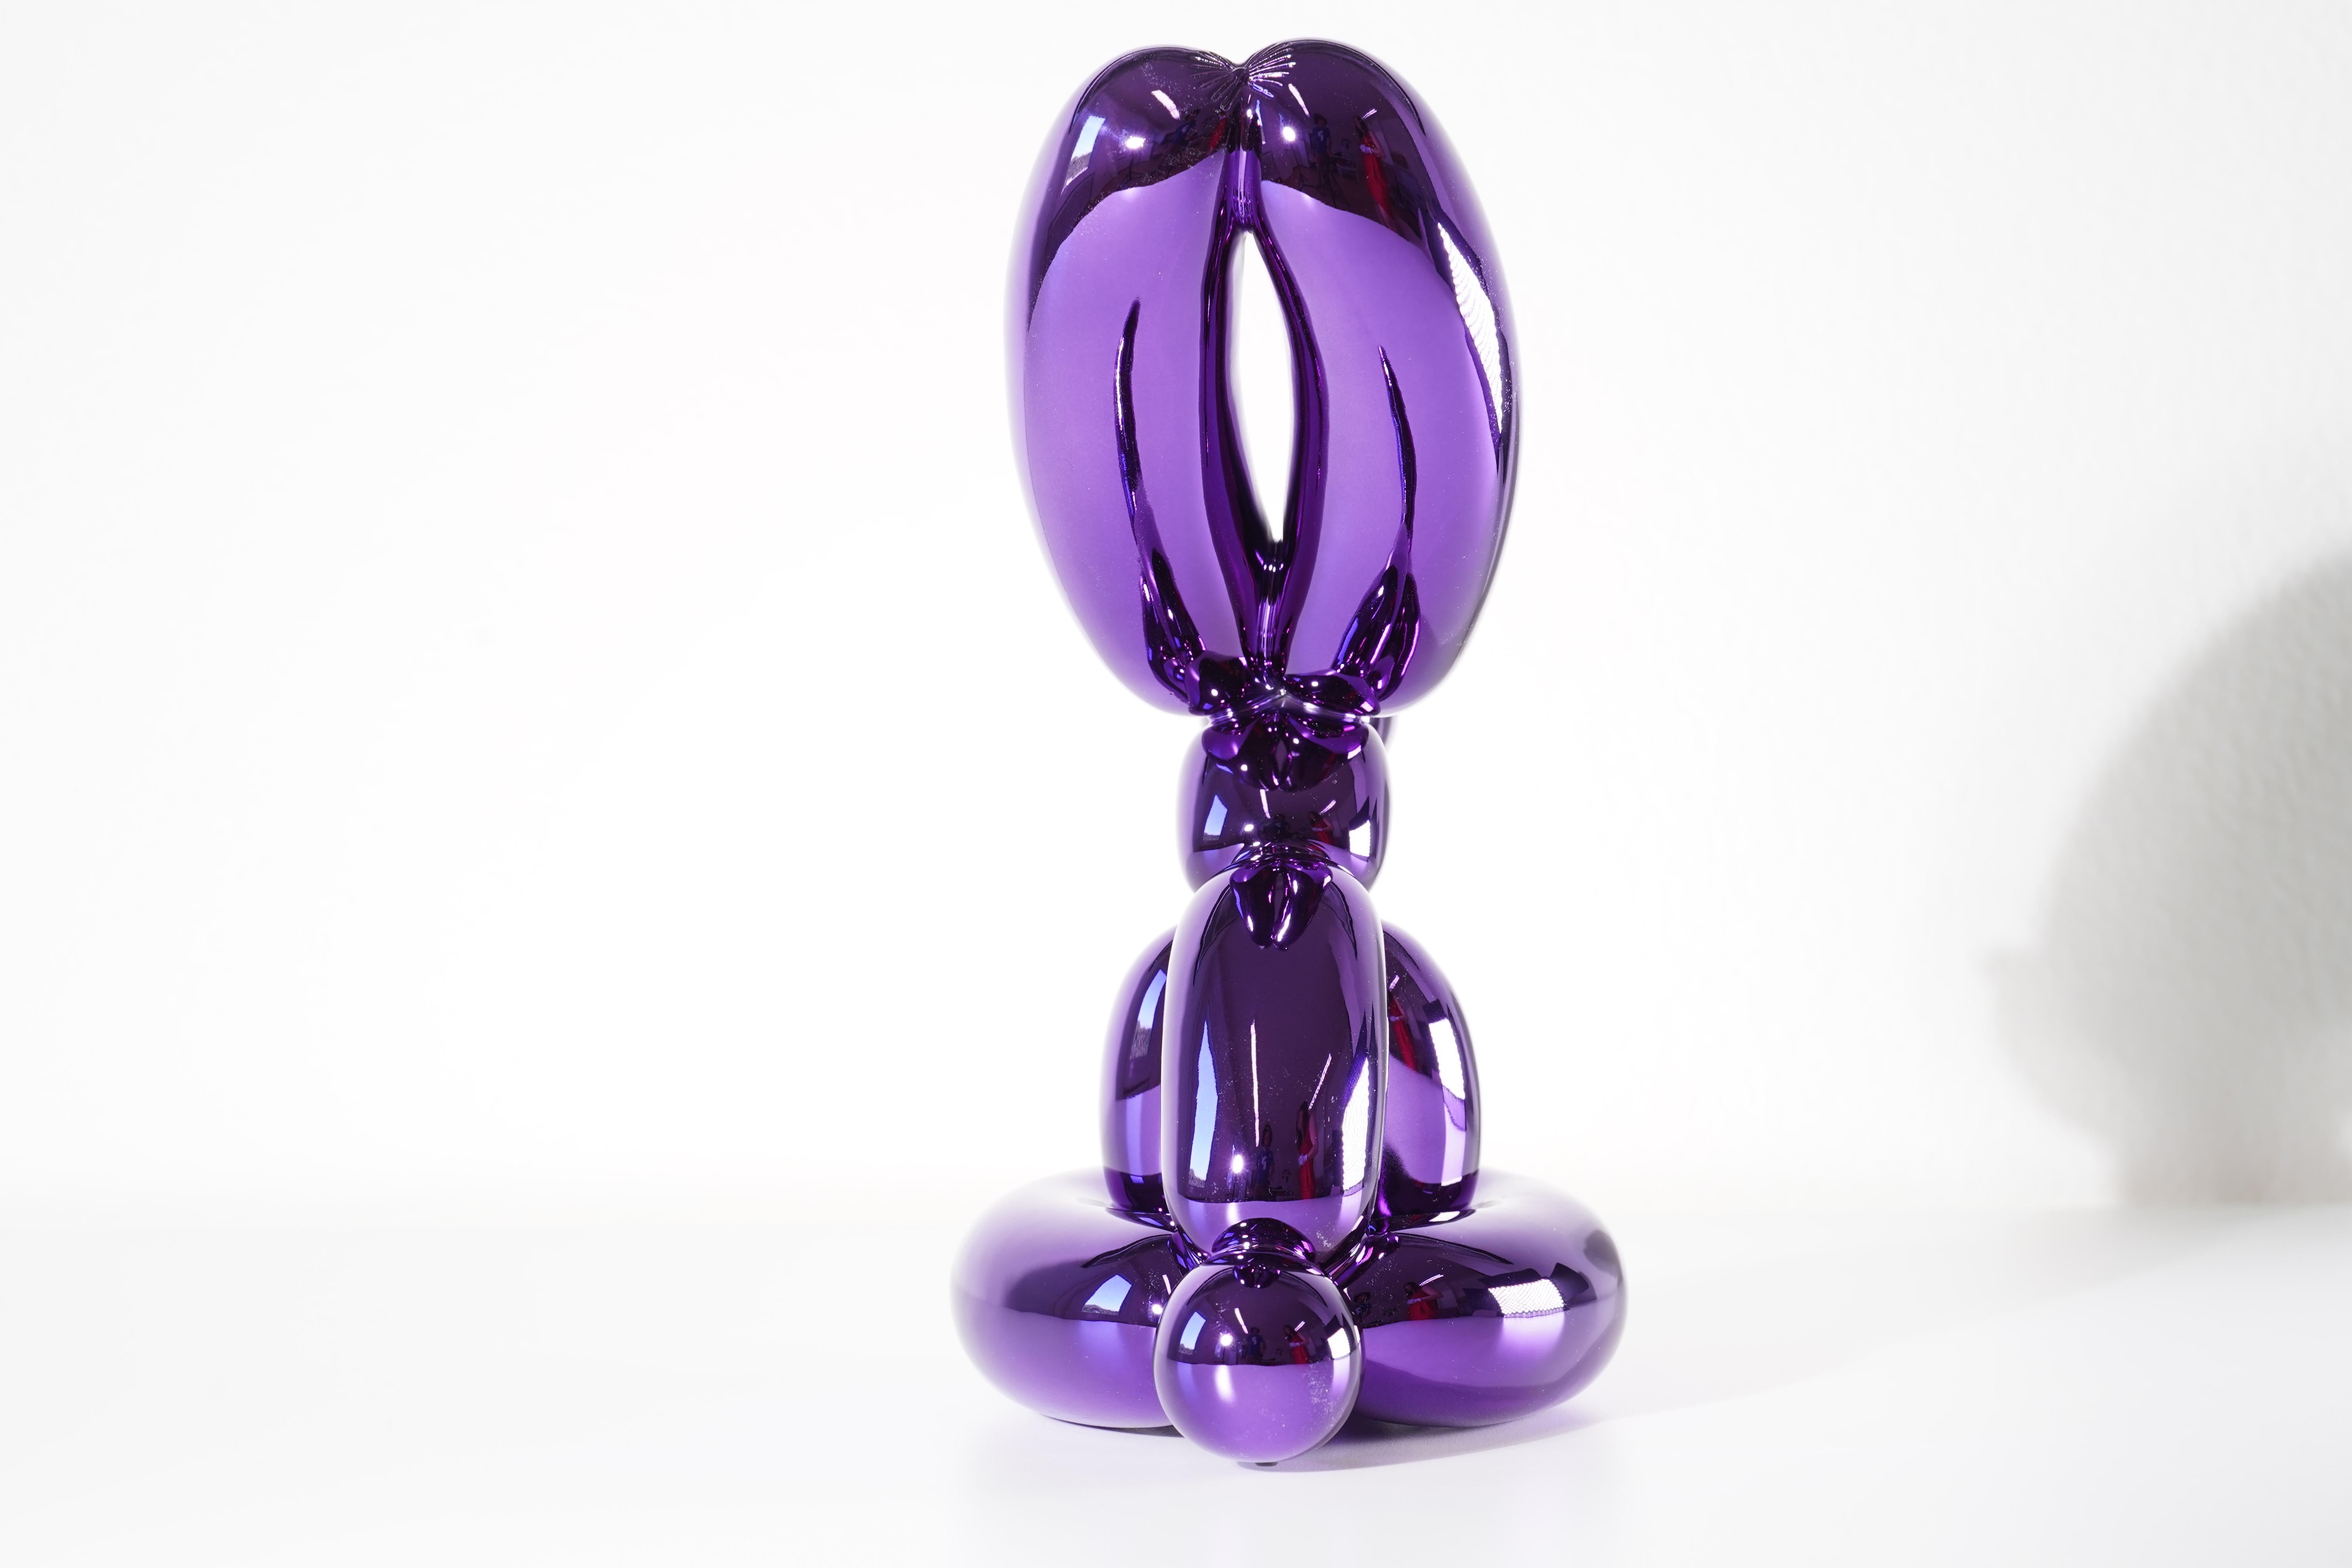 Violet Balloon Rabbit Iconic Sculpture by Jeff Koons, Porcelain, Contemporary  For Sale 1